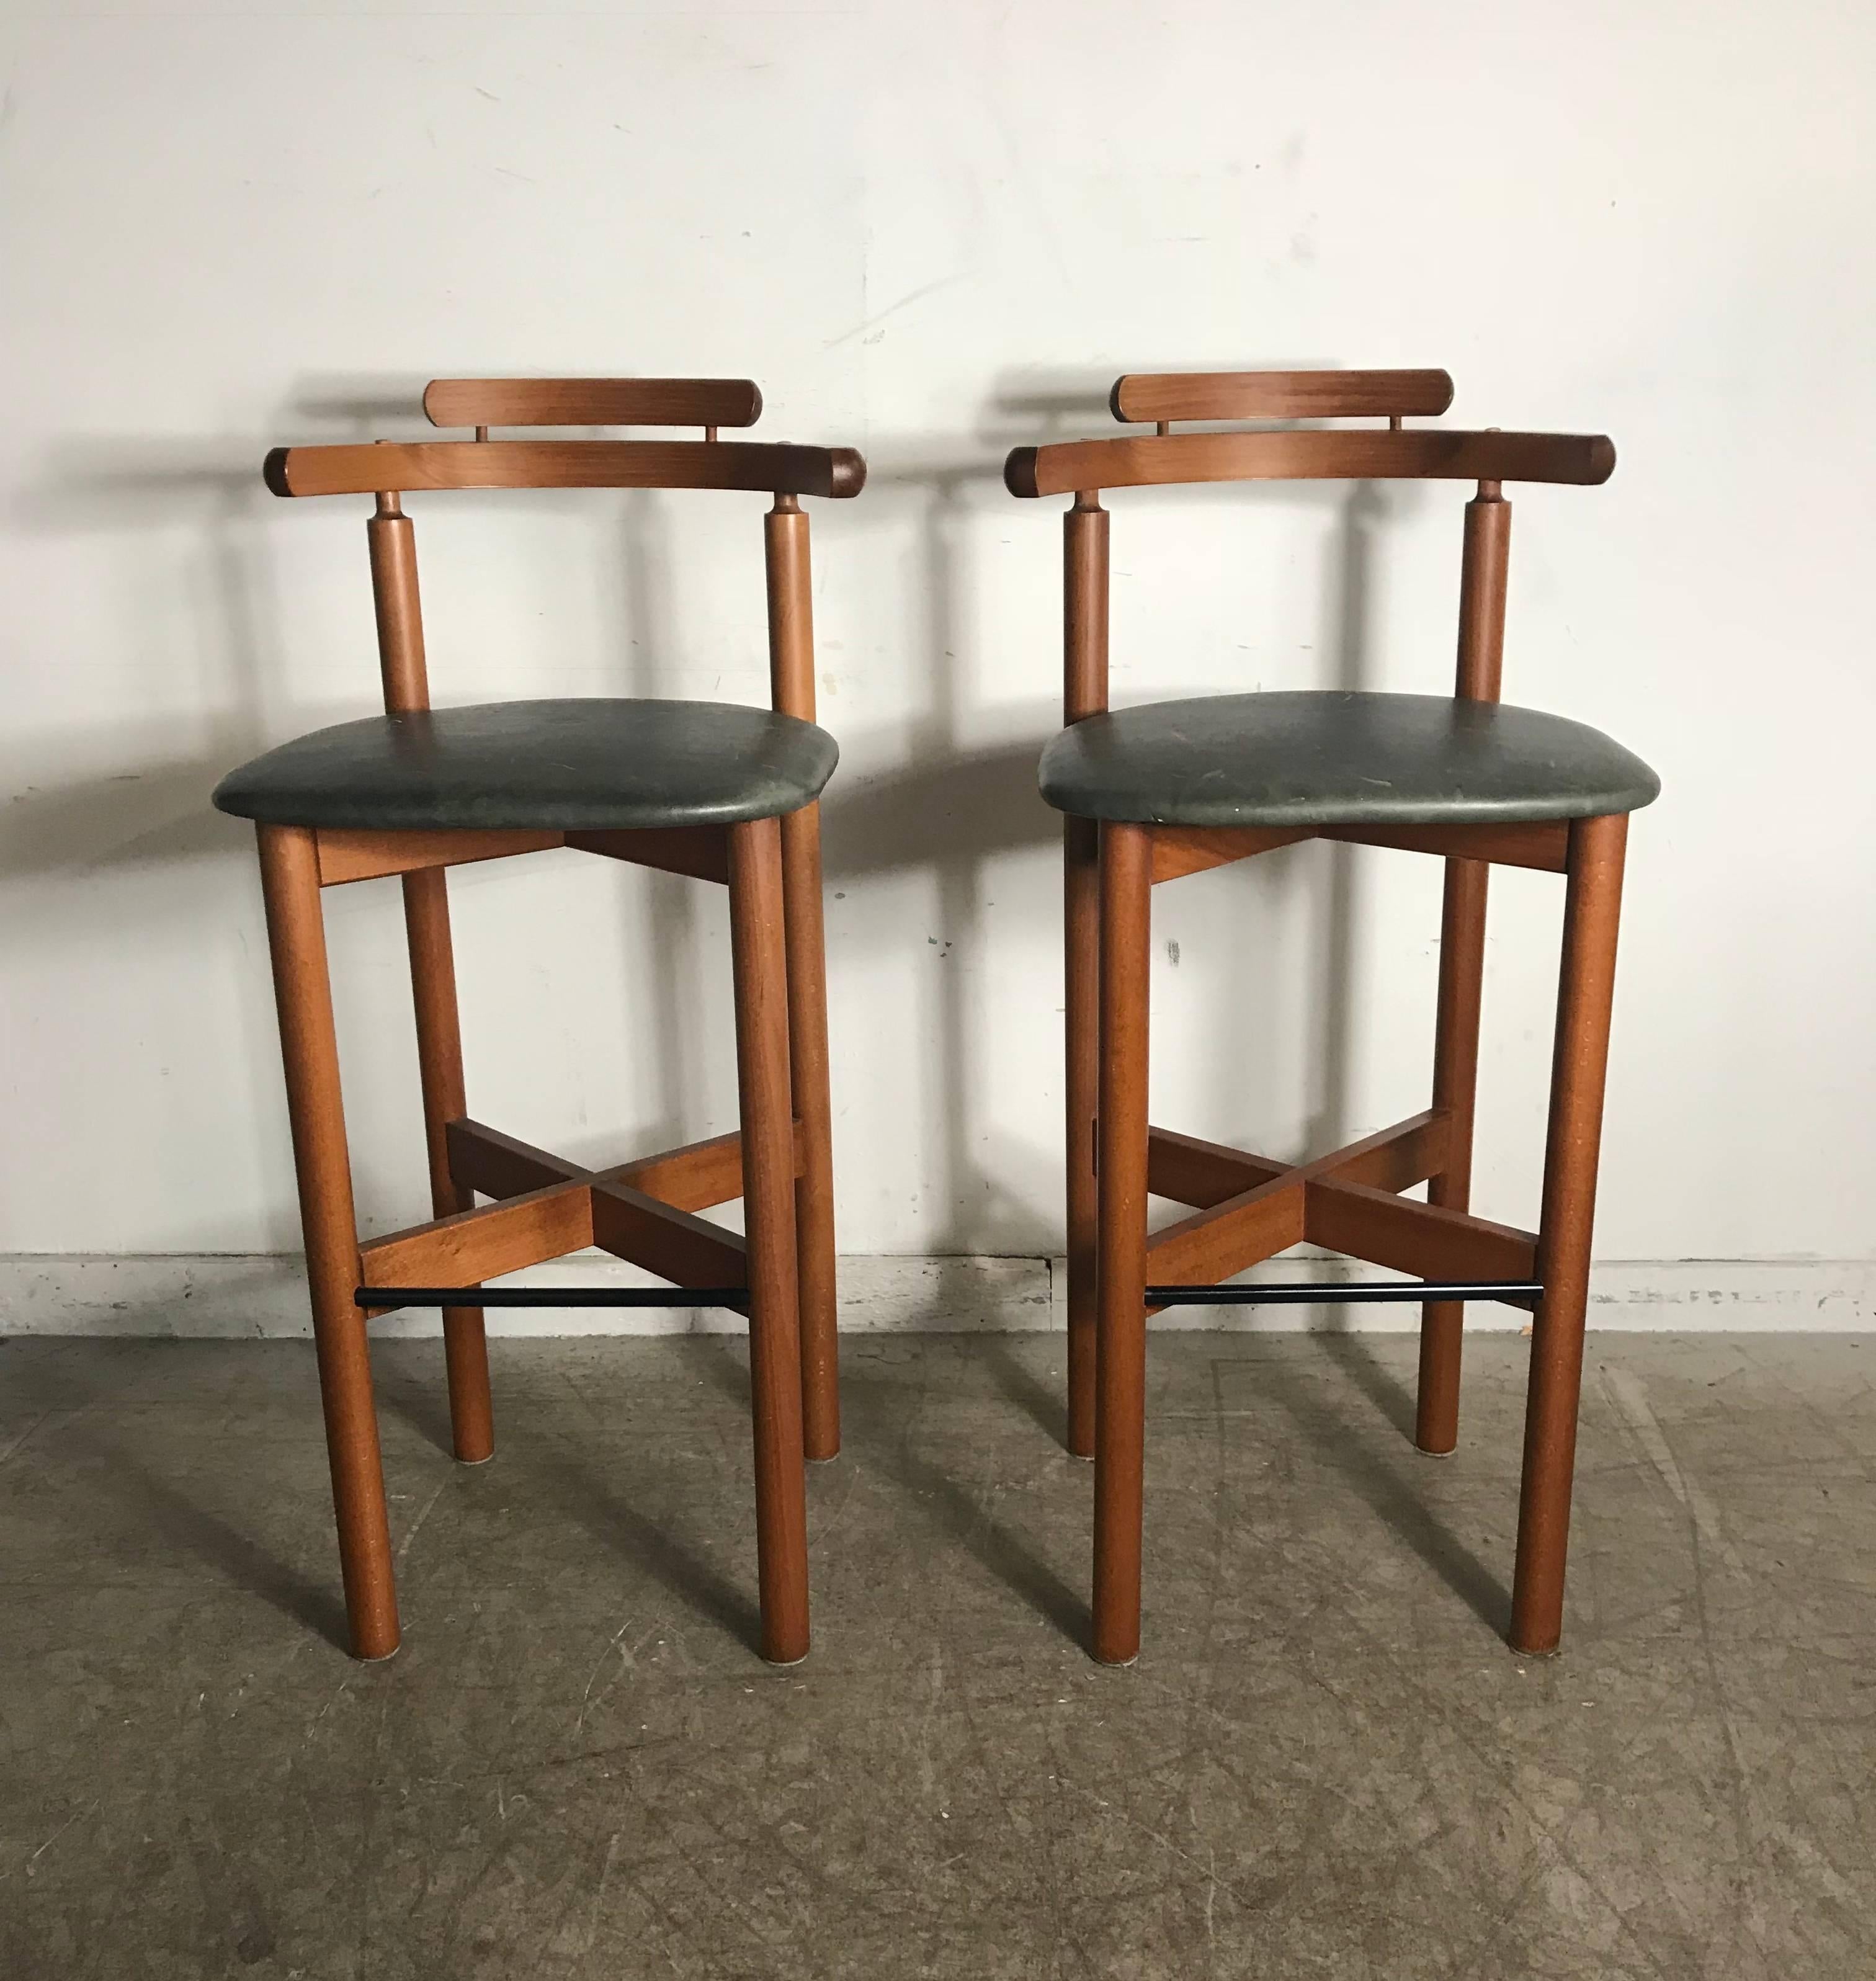 Pair of Danish bar or counter stools, teak and leather by Gangso Mobler, superior quality and construction Classic Scandinavian design and styling.